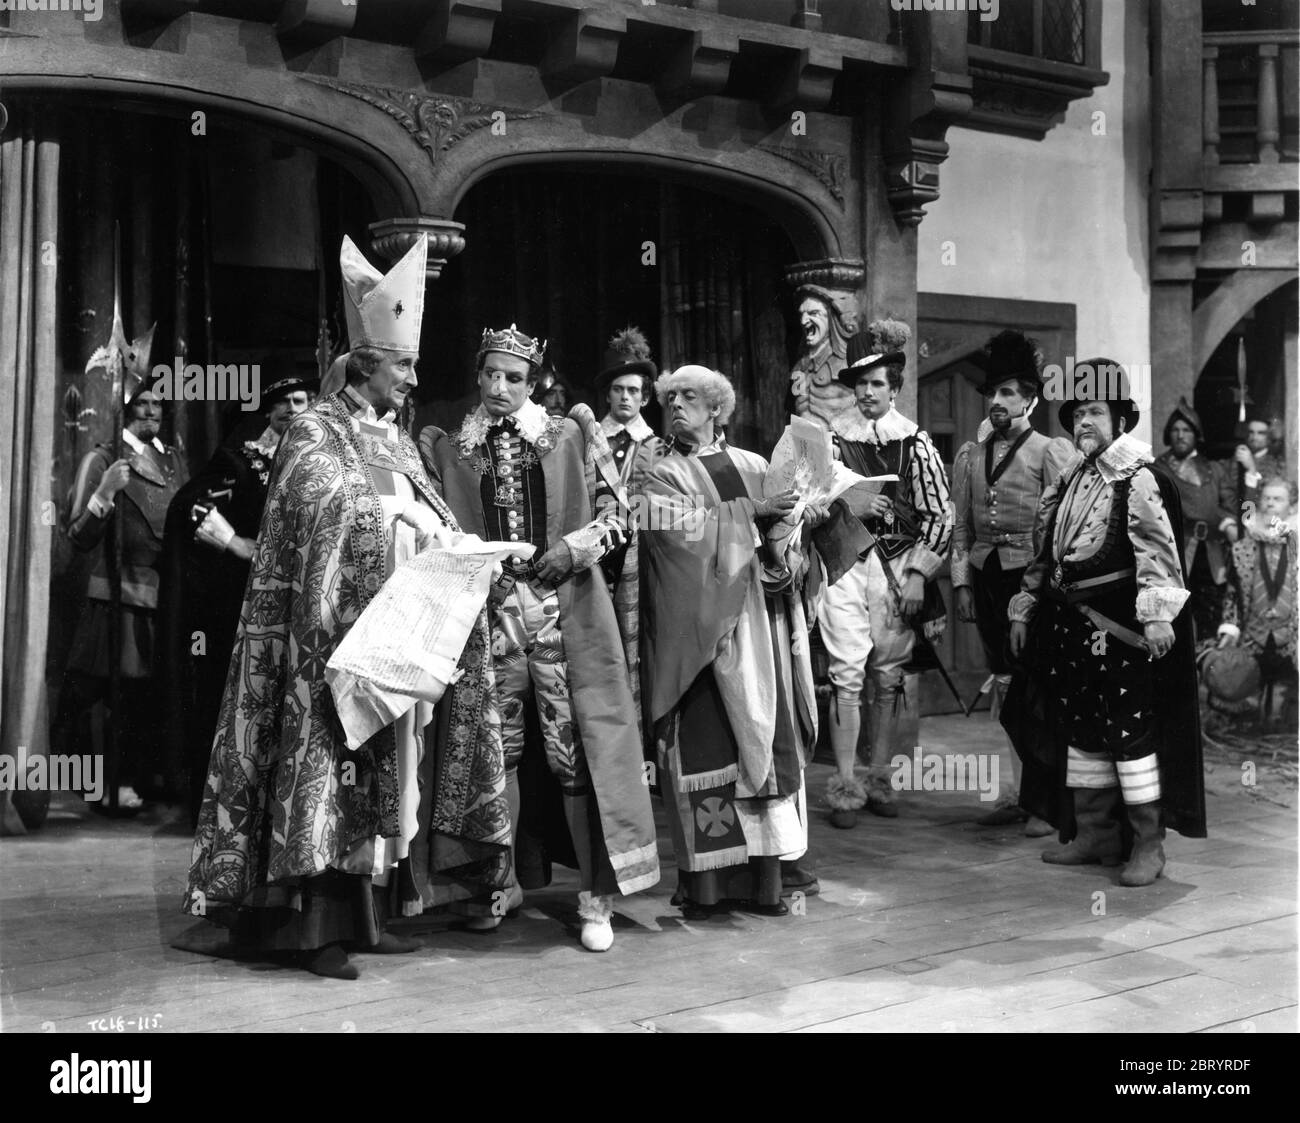 NICHOLAS HANNAN FELIX AYLMER LAURENCE OLIVIER GRIFFITH JONES and GERALD CASE performing in Globe Theatre in HENRY V 1944 director LAURENCE OLIVIER play William Shakespeare music William Walton Two Cities Films / Eagle - Lion Distributors Ltd Stock Photo